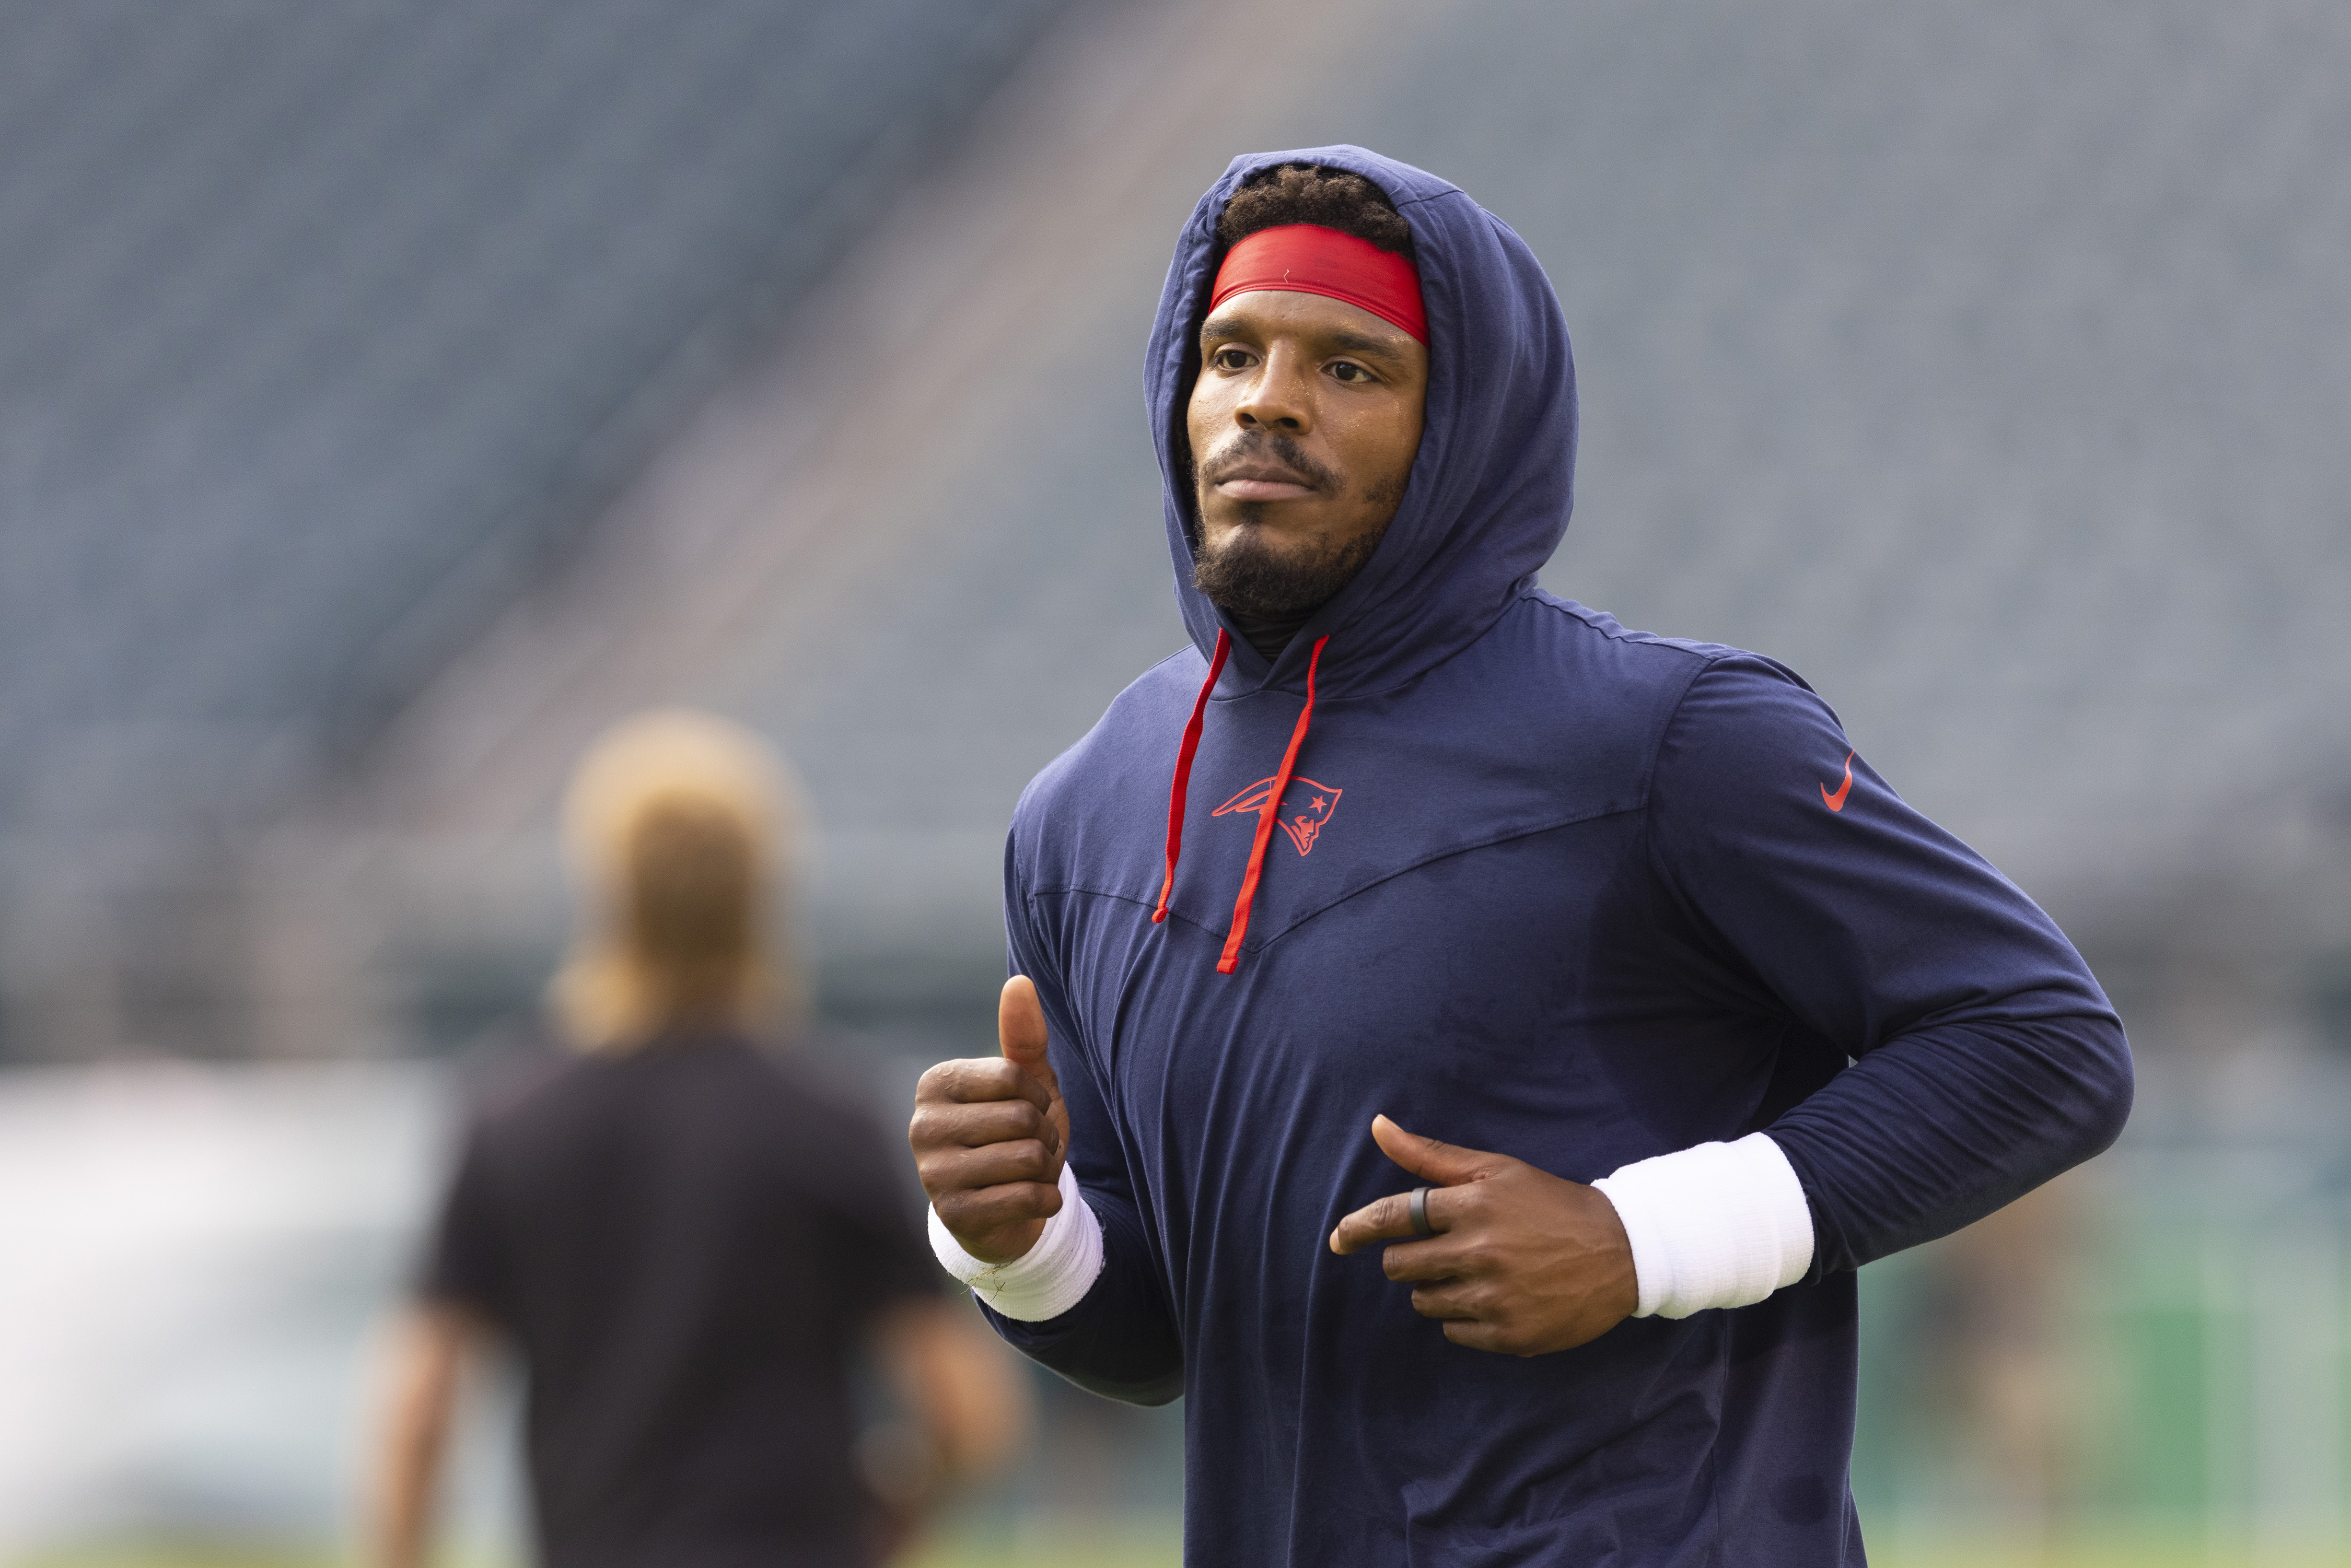 Patriots' Cam Newton Out 5 Days Due to 'Misunderstanding' About COVID Tests Conducted